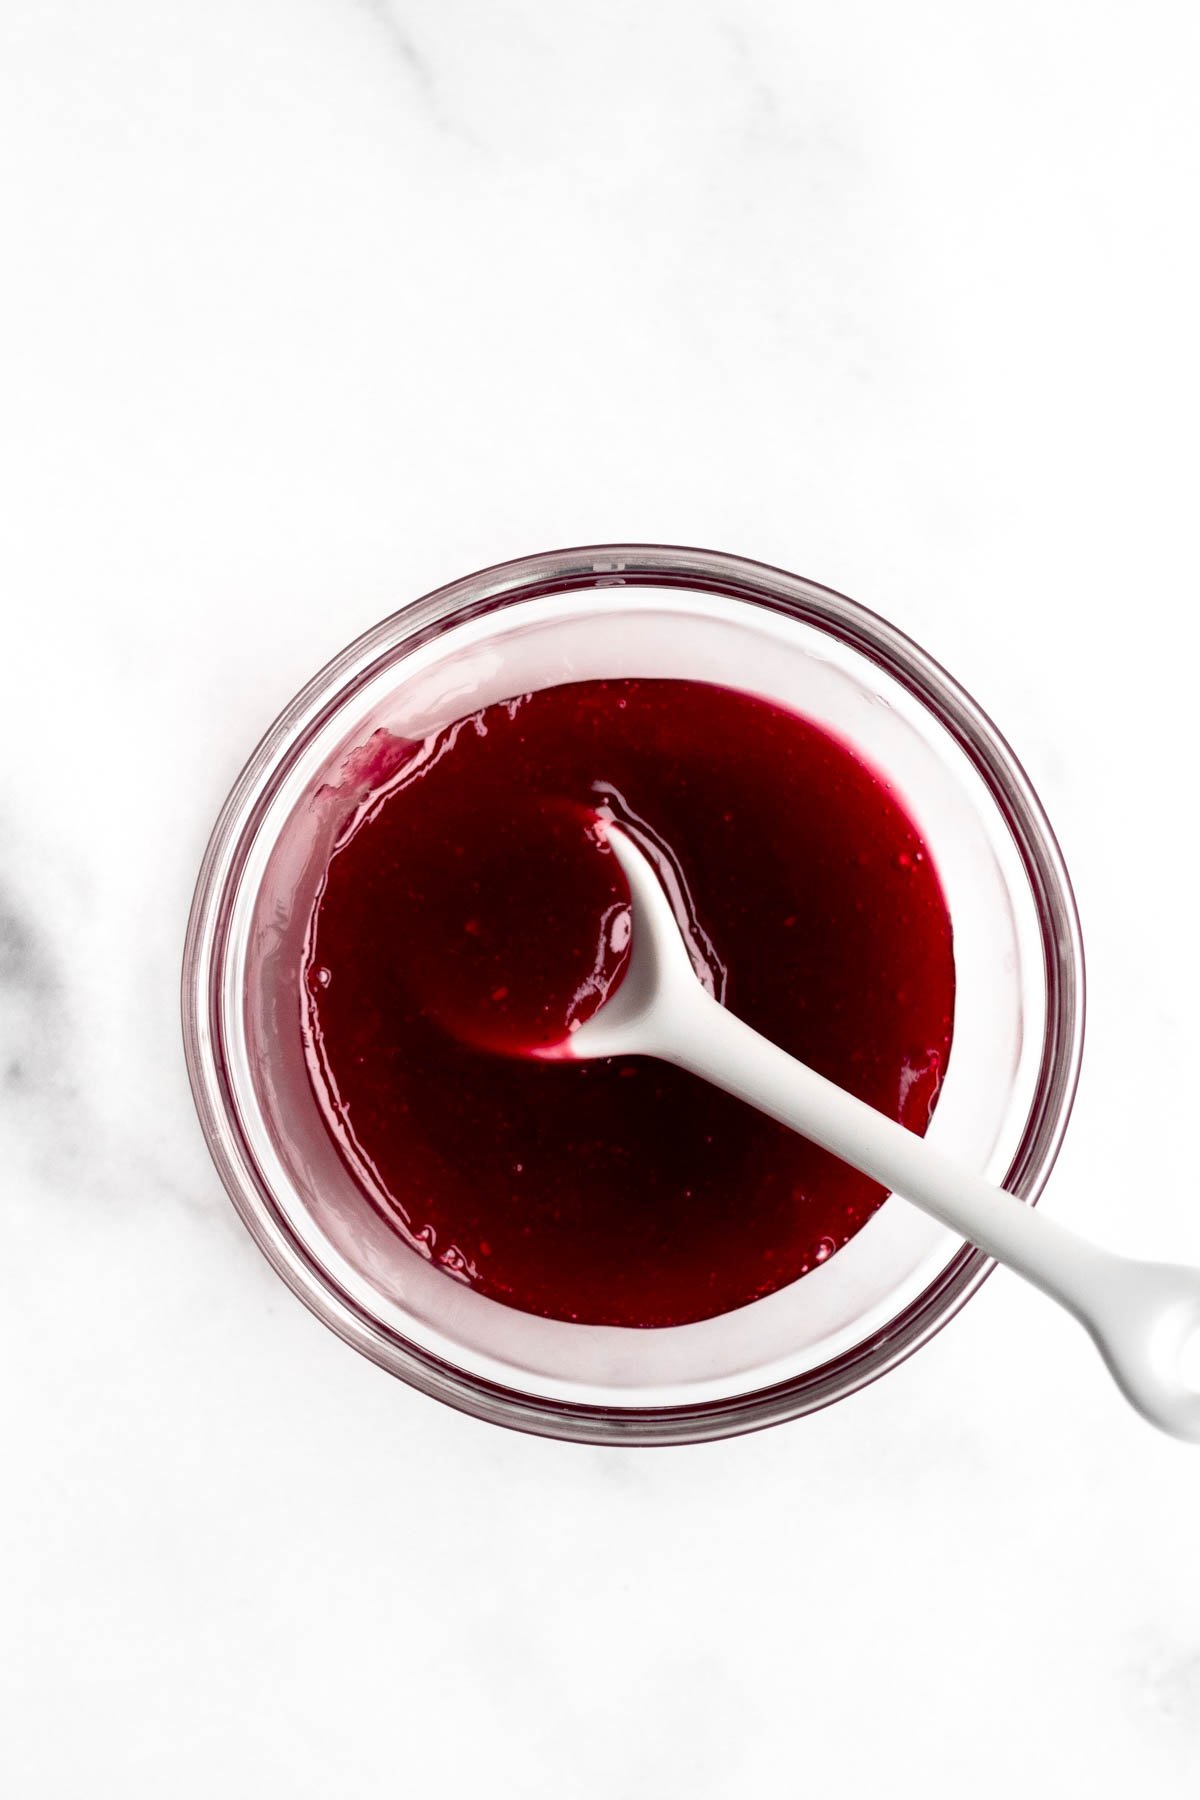 Bright red raspberry sauce without seeds in a glass bowl.